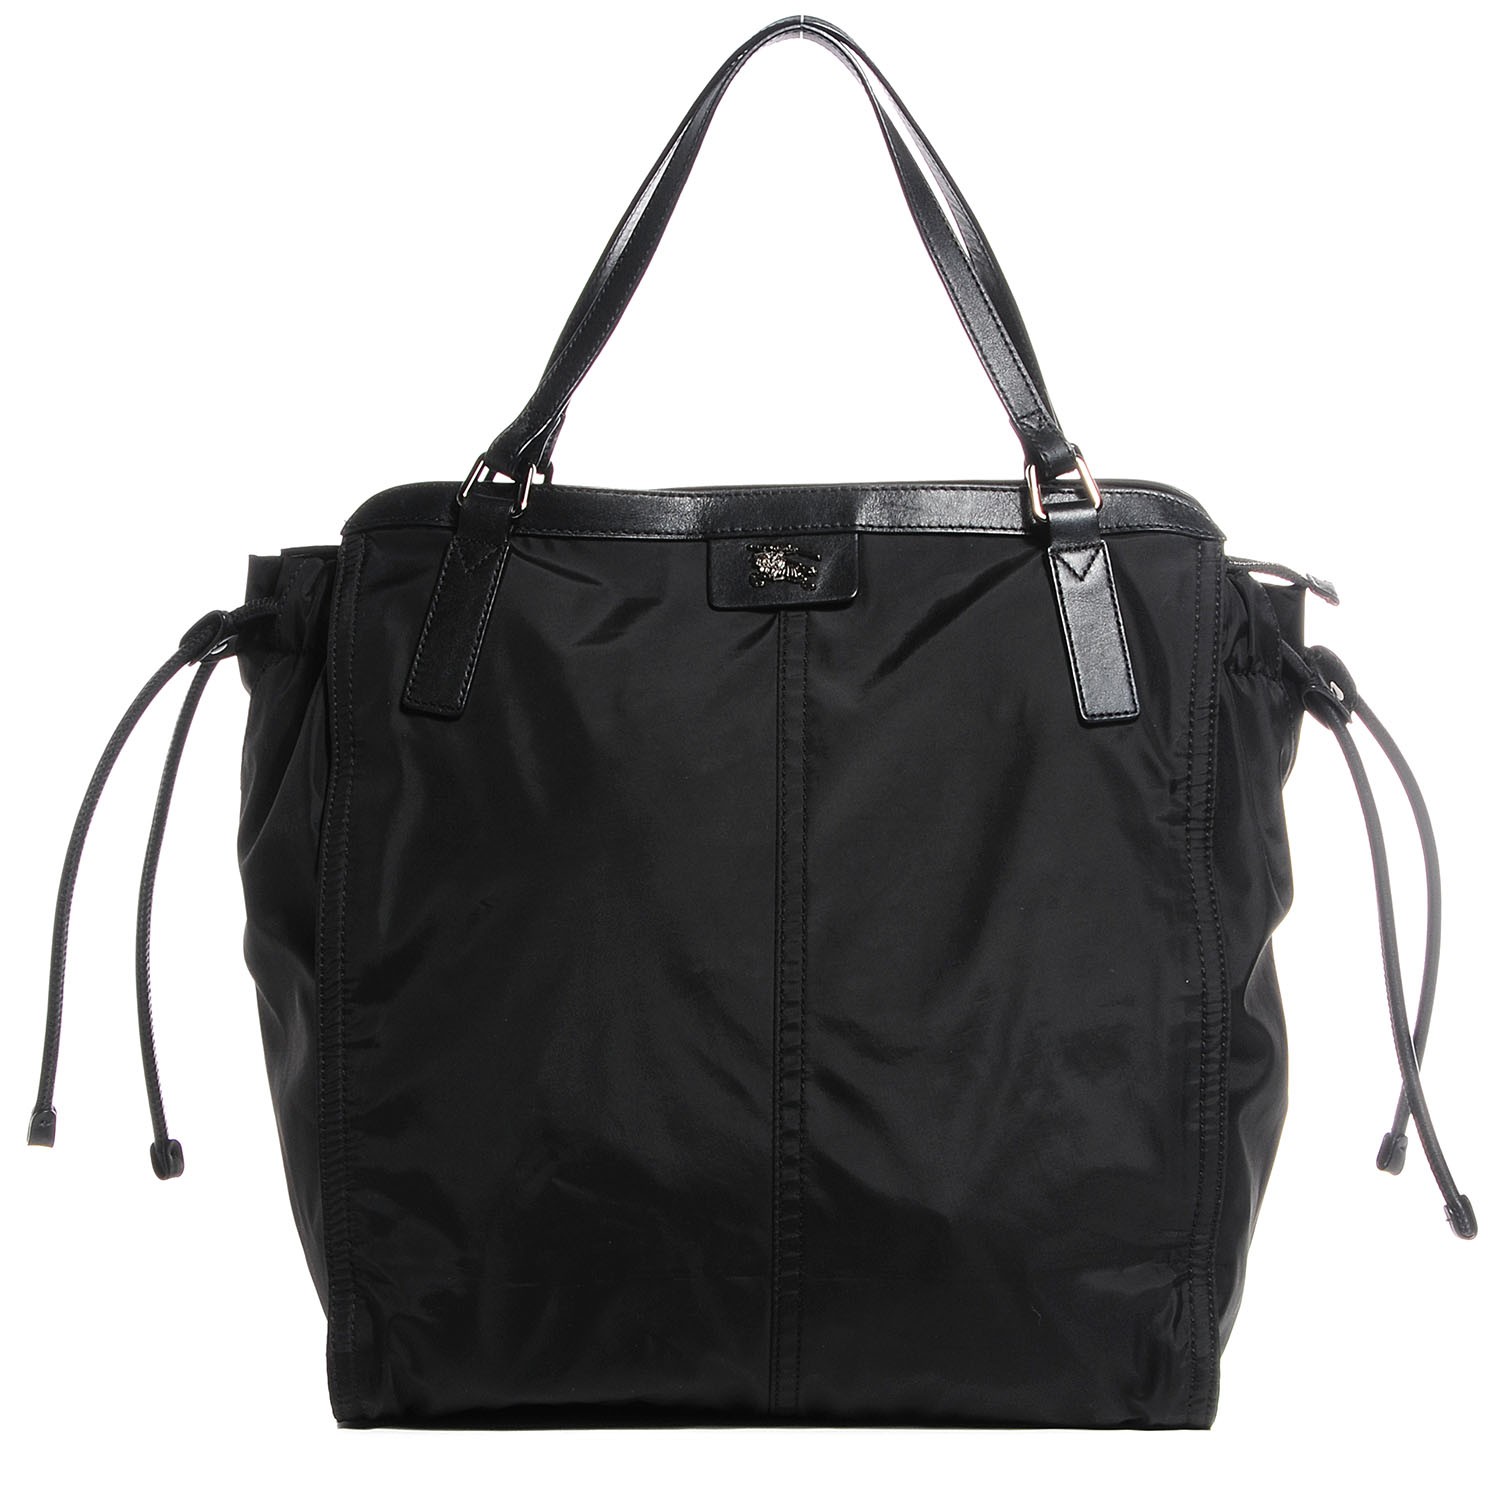 BURBERRY Nylon Buckleigh Packable Tote Black 94176